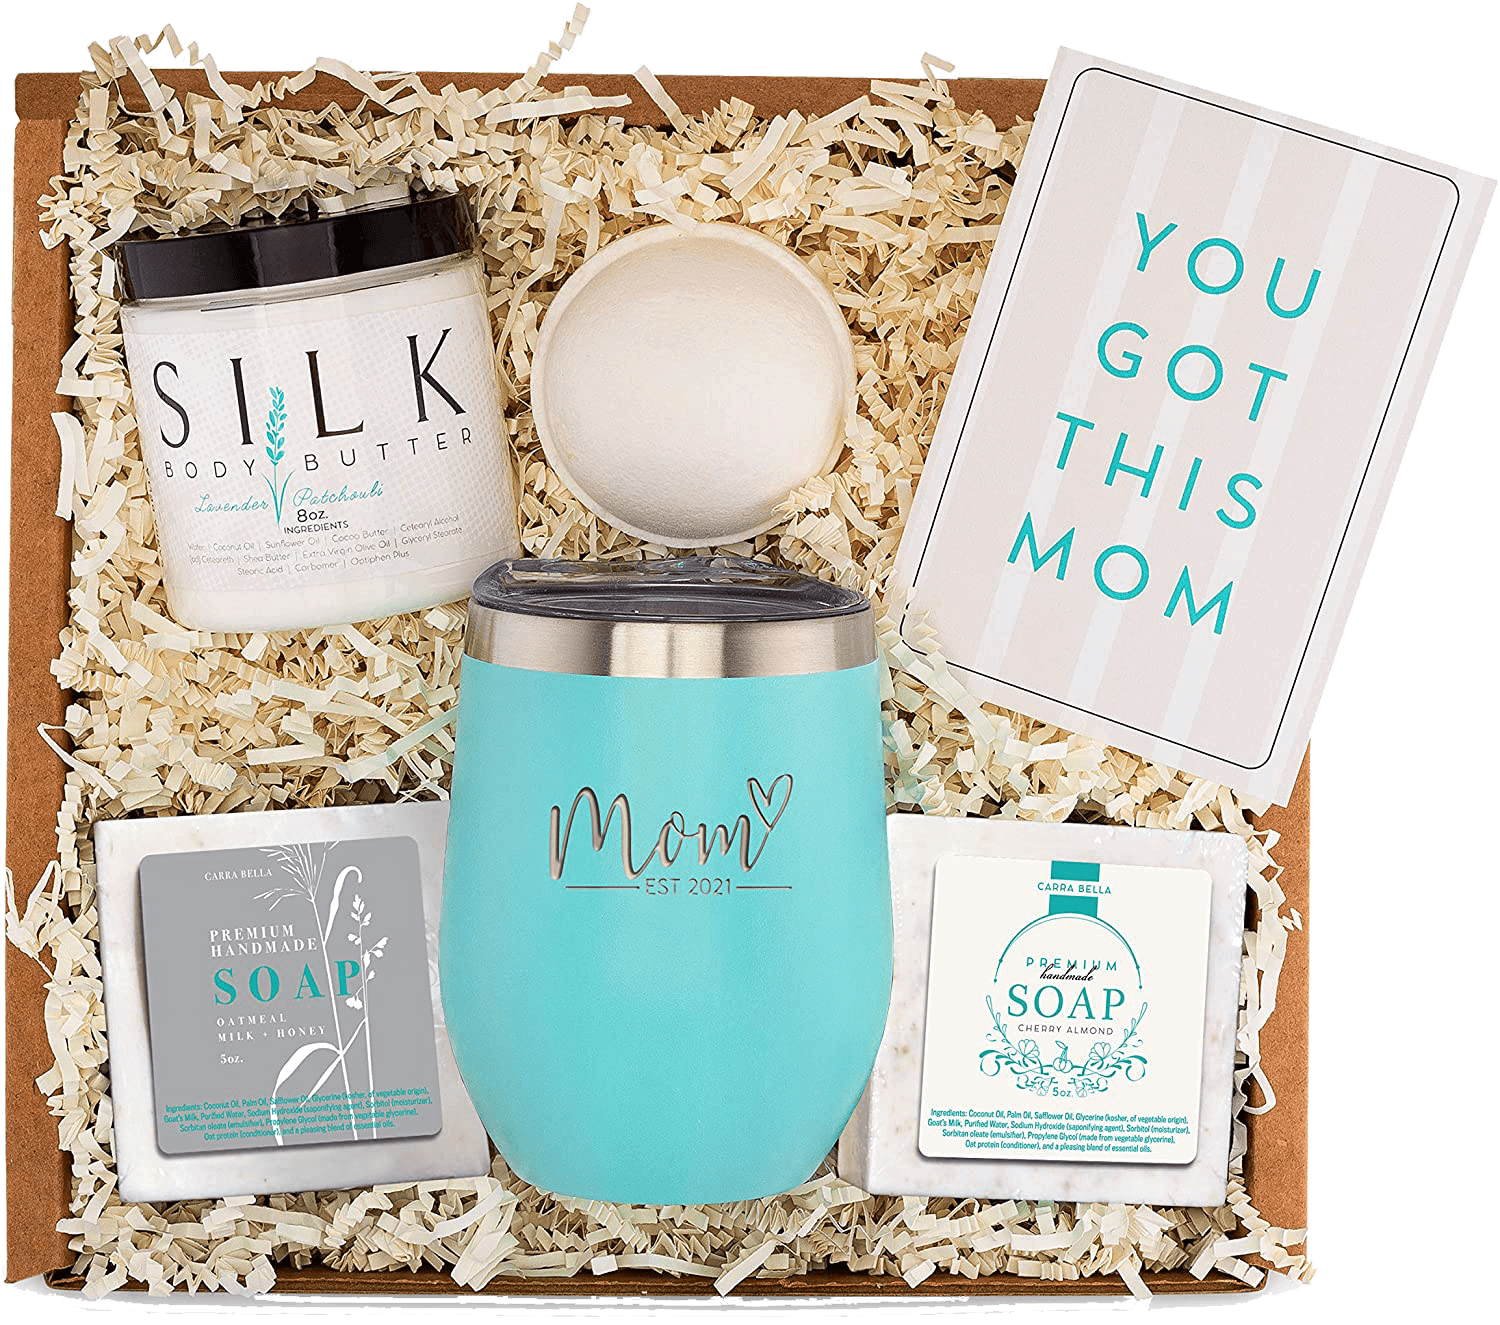 A Perfect GIFT BOX FOR THE NEW MOM (includes natural premium soaps, one bath bomb, silk skin lotion and a special gift card)